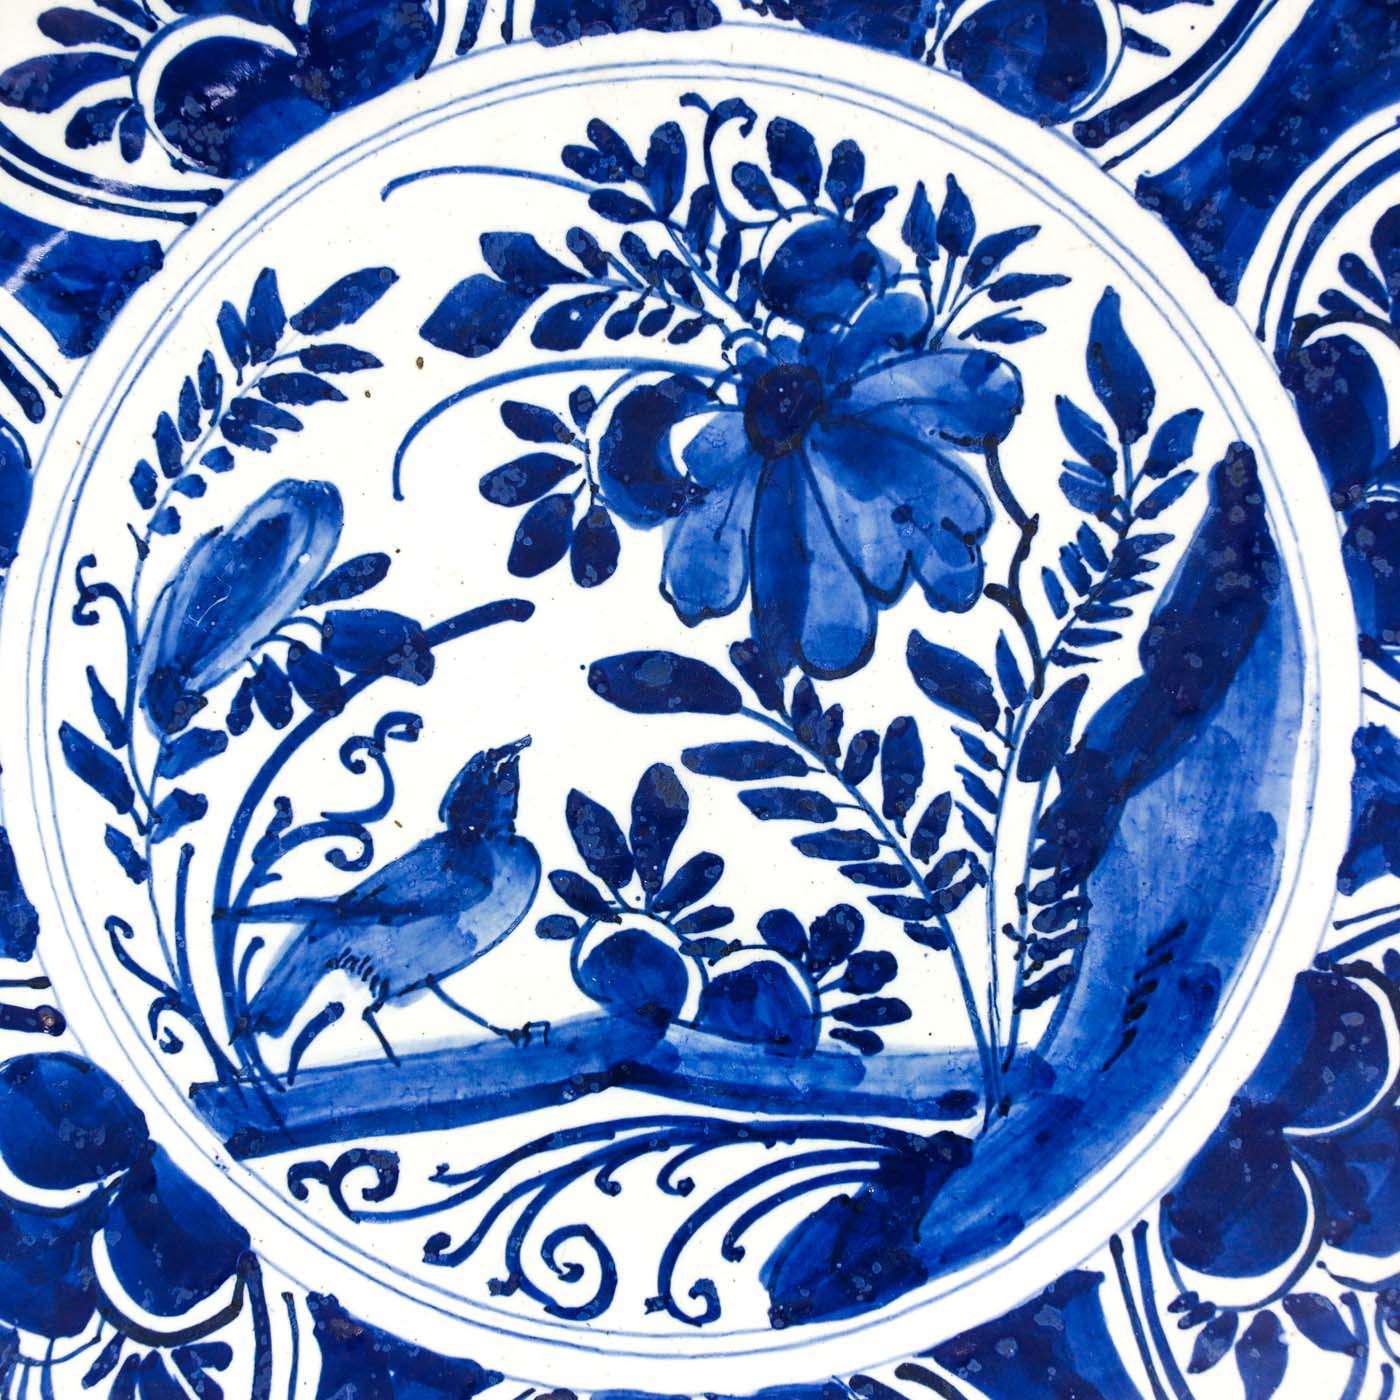 A 17th Century Delft Plate - Image 4 of 5